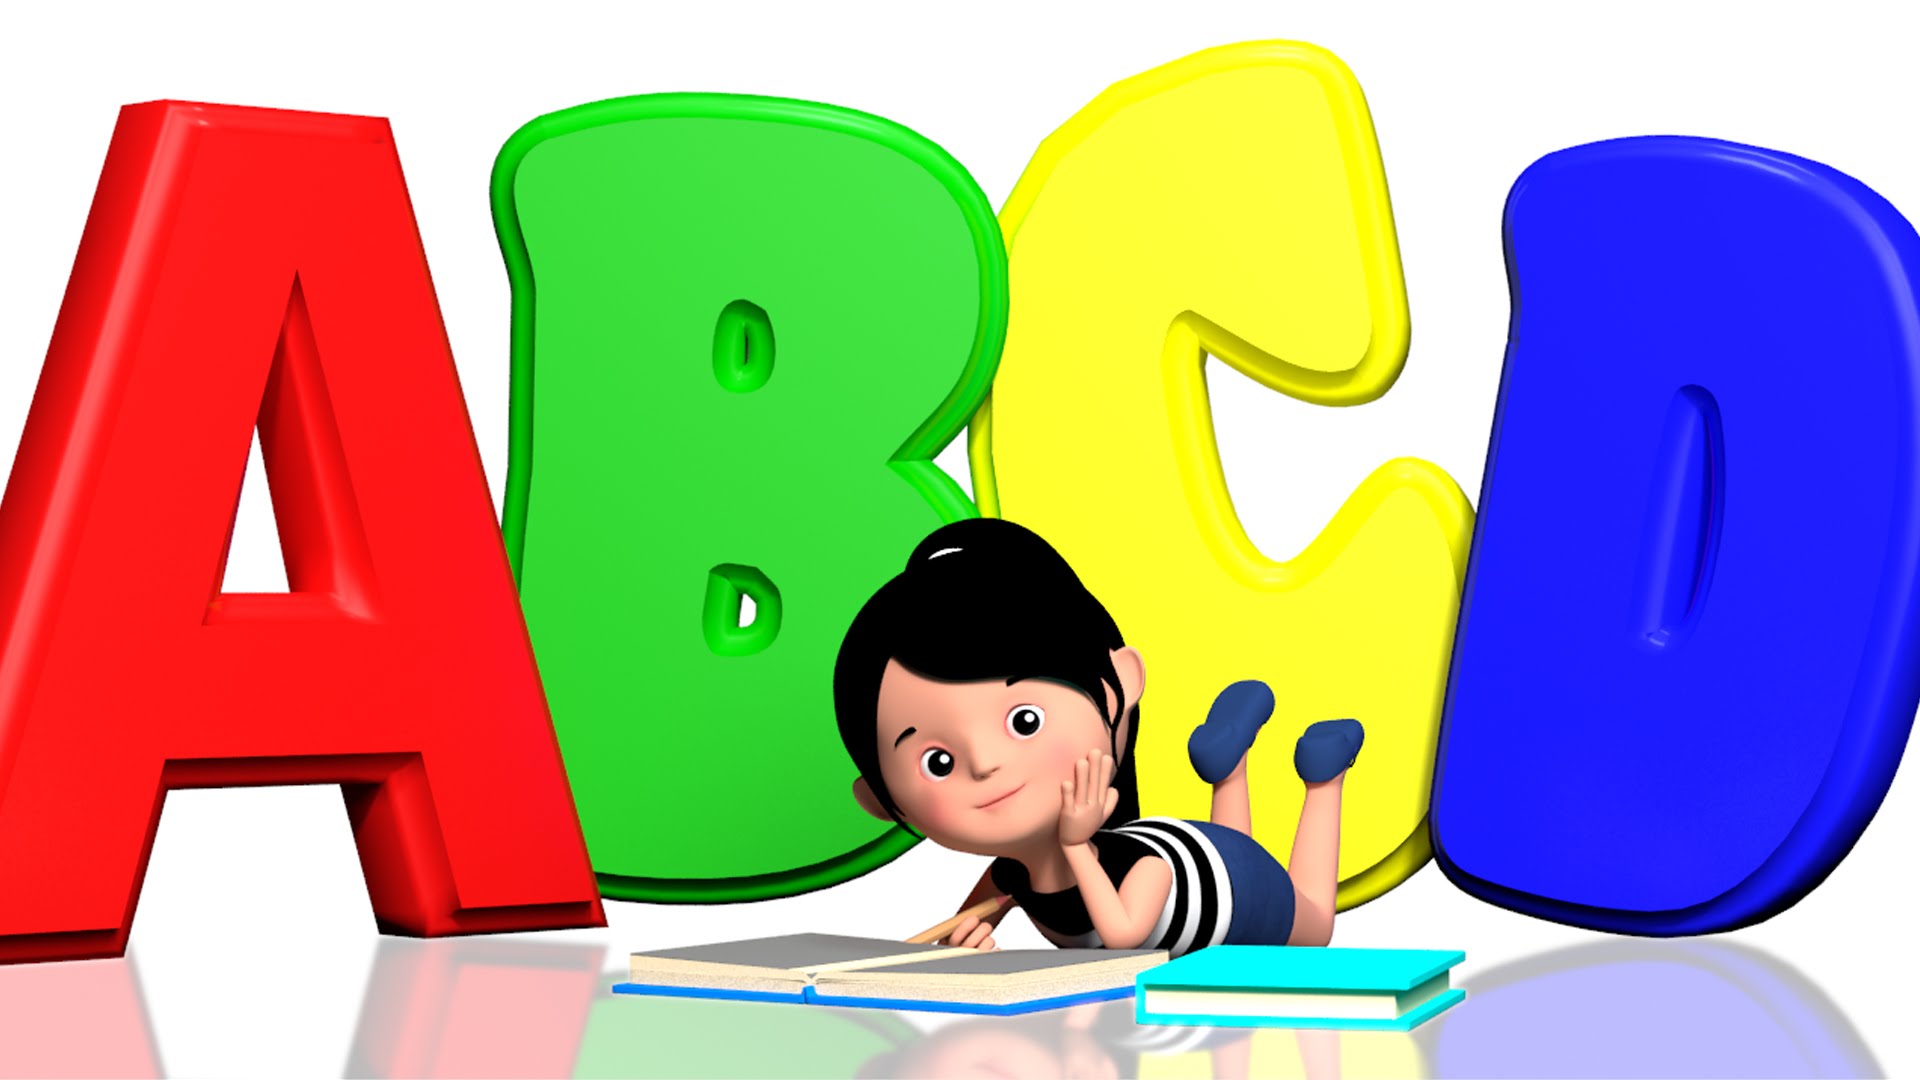 Abc clipart abcd, Abc abcd Transparent FREE for download on.